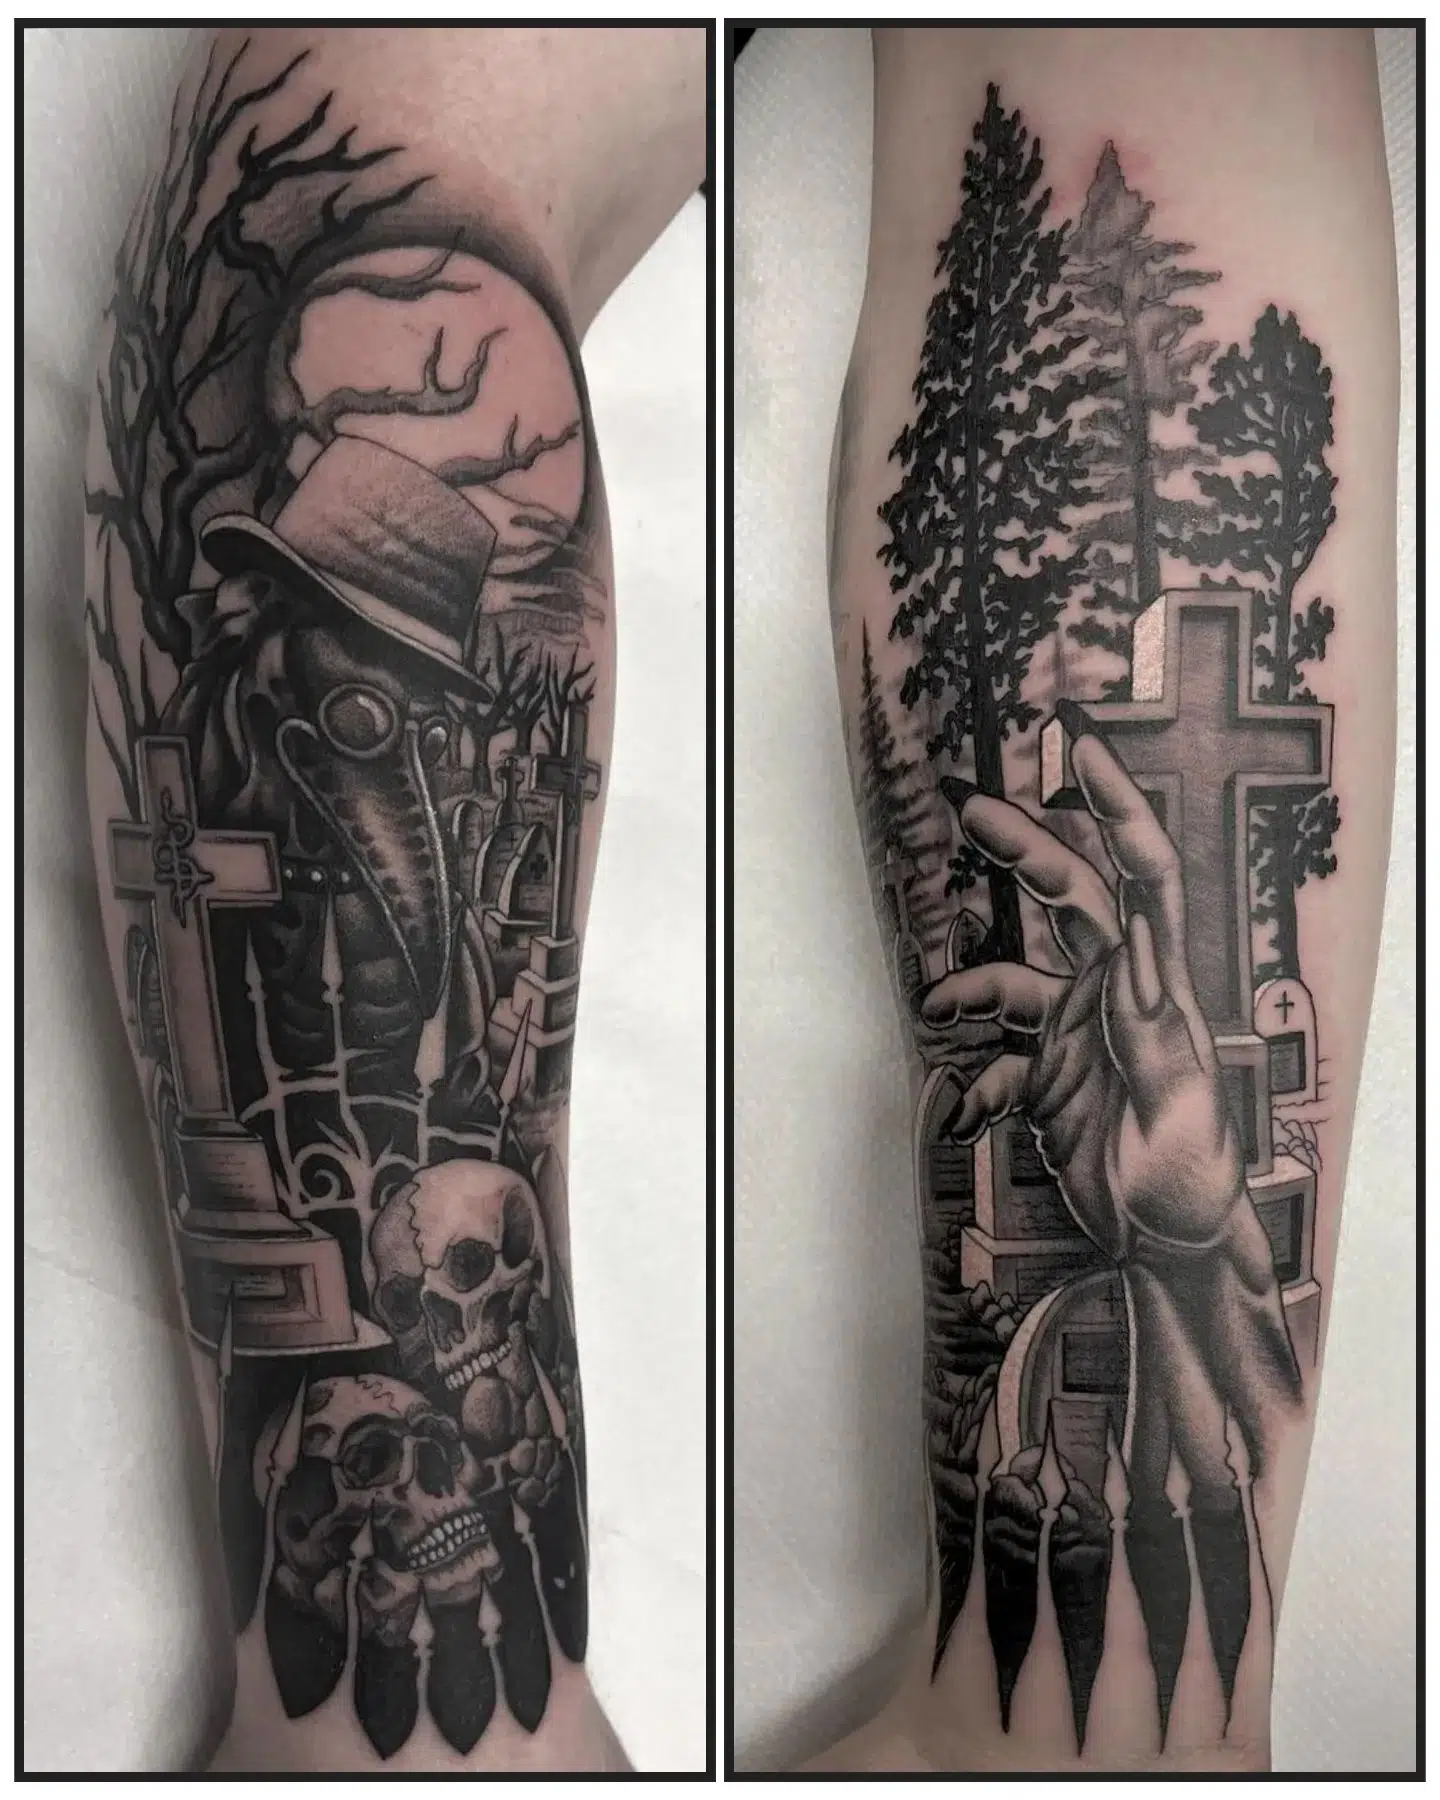 Couple of spooky half sleeves done by Enrique. Unfortunately the man is booked up between now and Halloween but if your looking you extend the season of the spook he has spaces available in November!
enriquevemu 

                